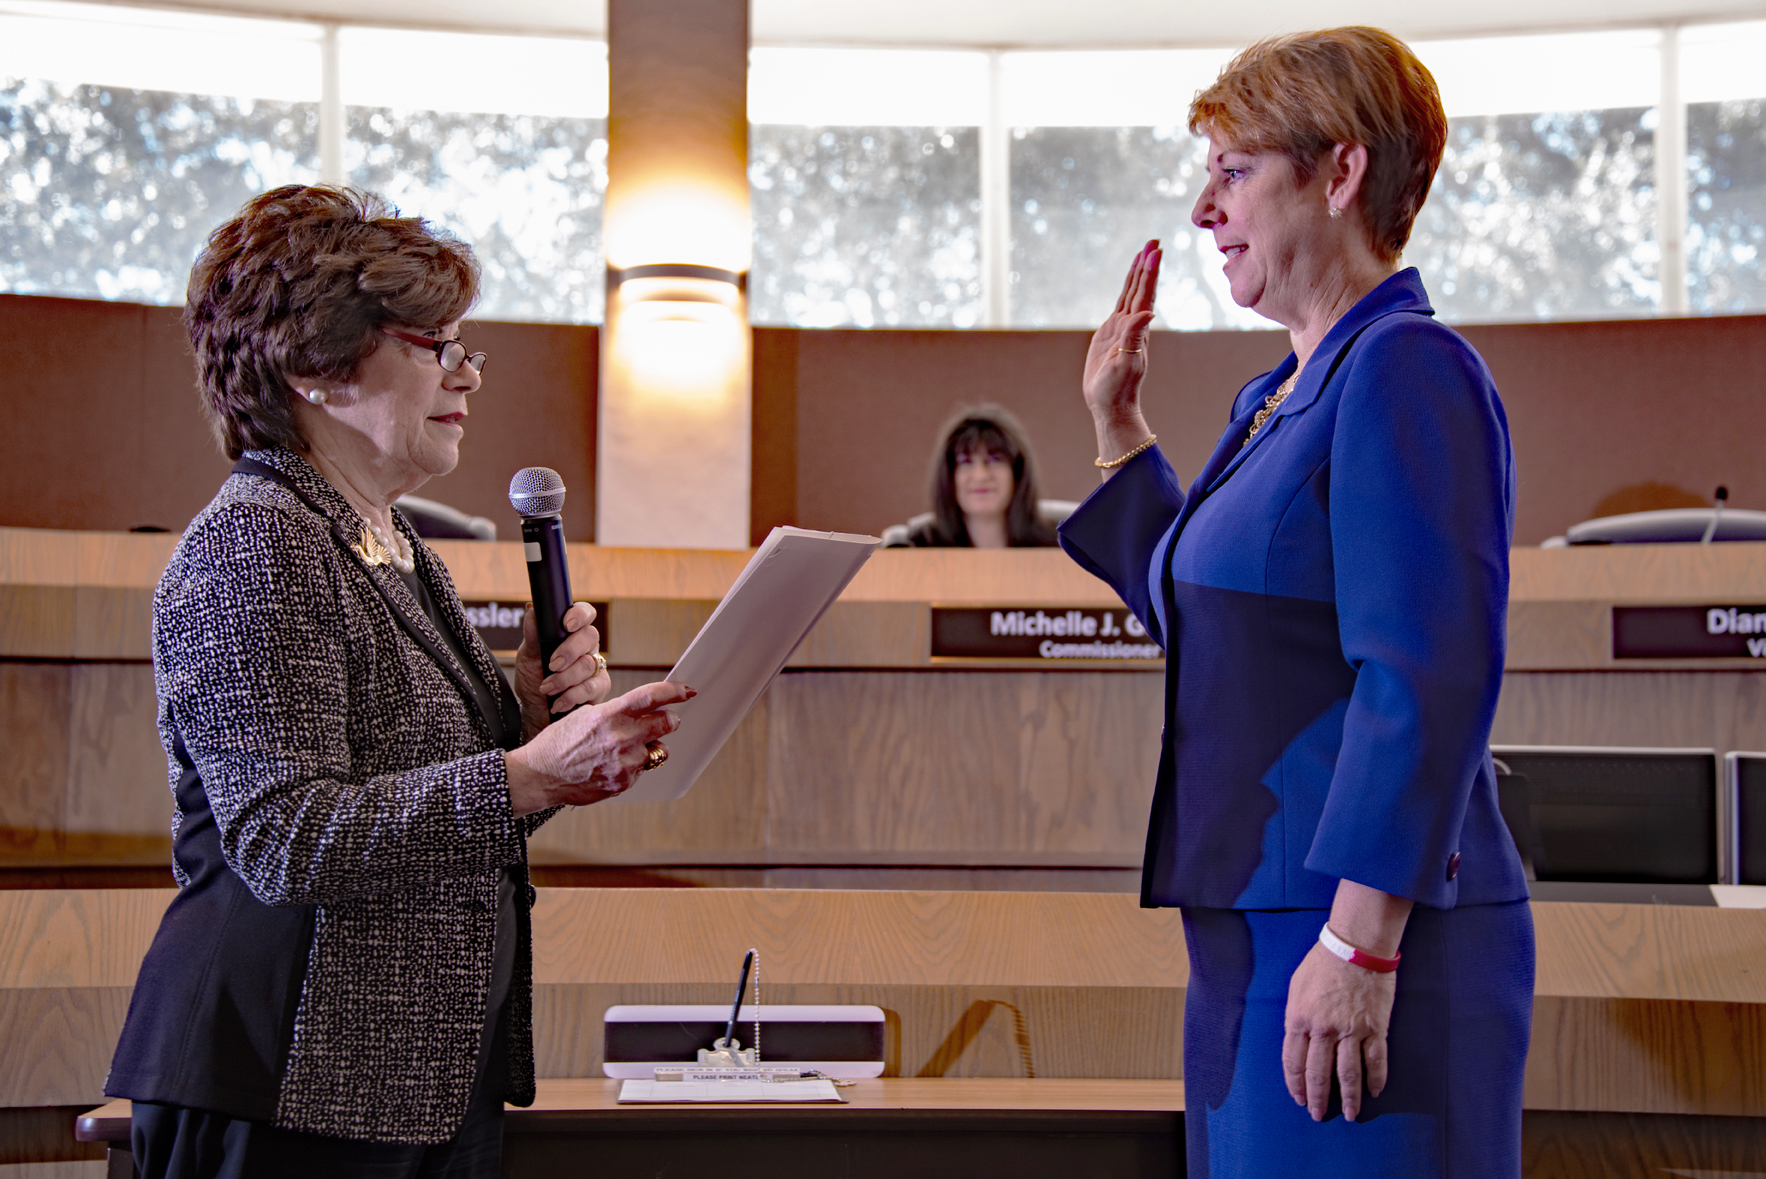 Newly elected Broward County Commissioner Nan Rich swearing in Julie Fishman.